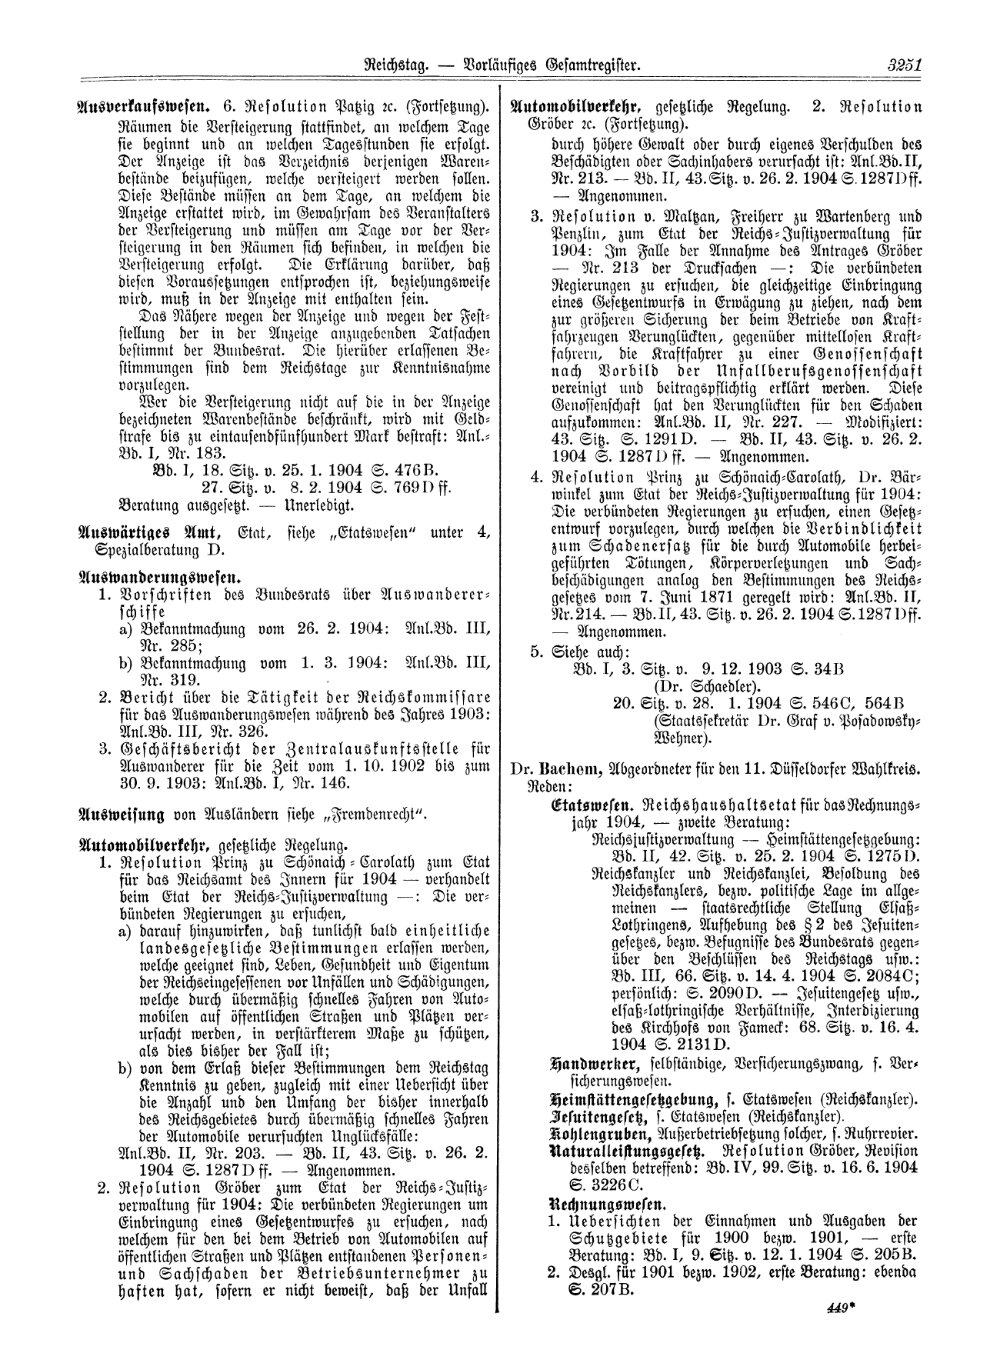 Scan of page 3251